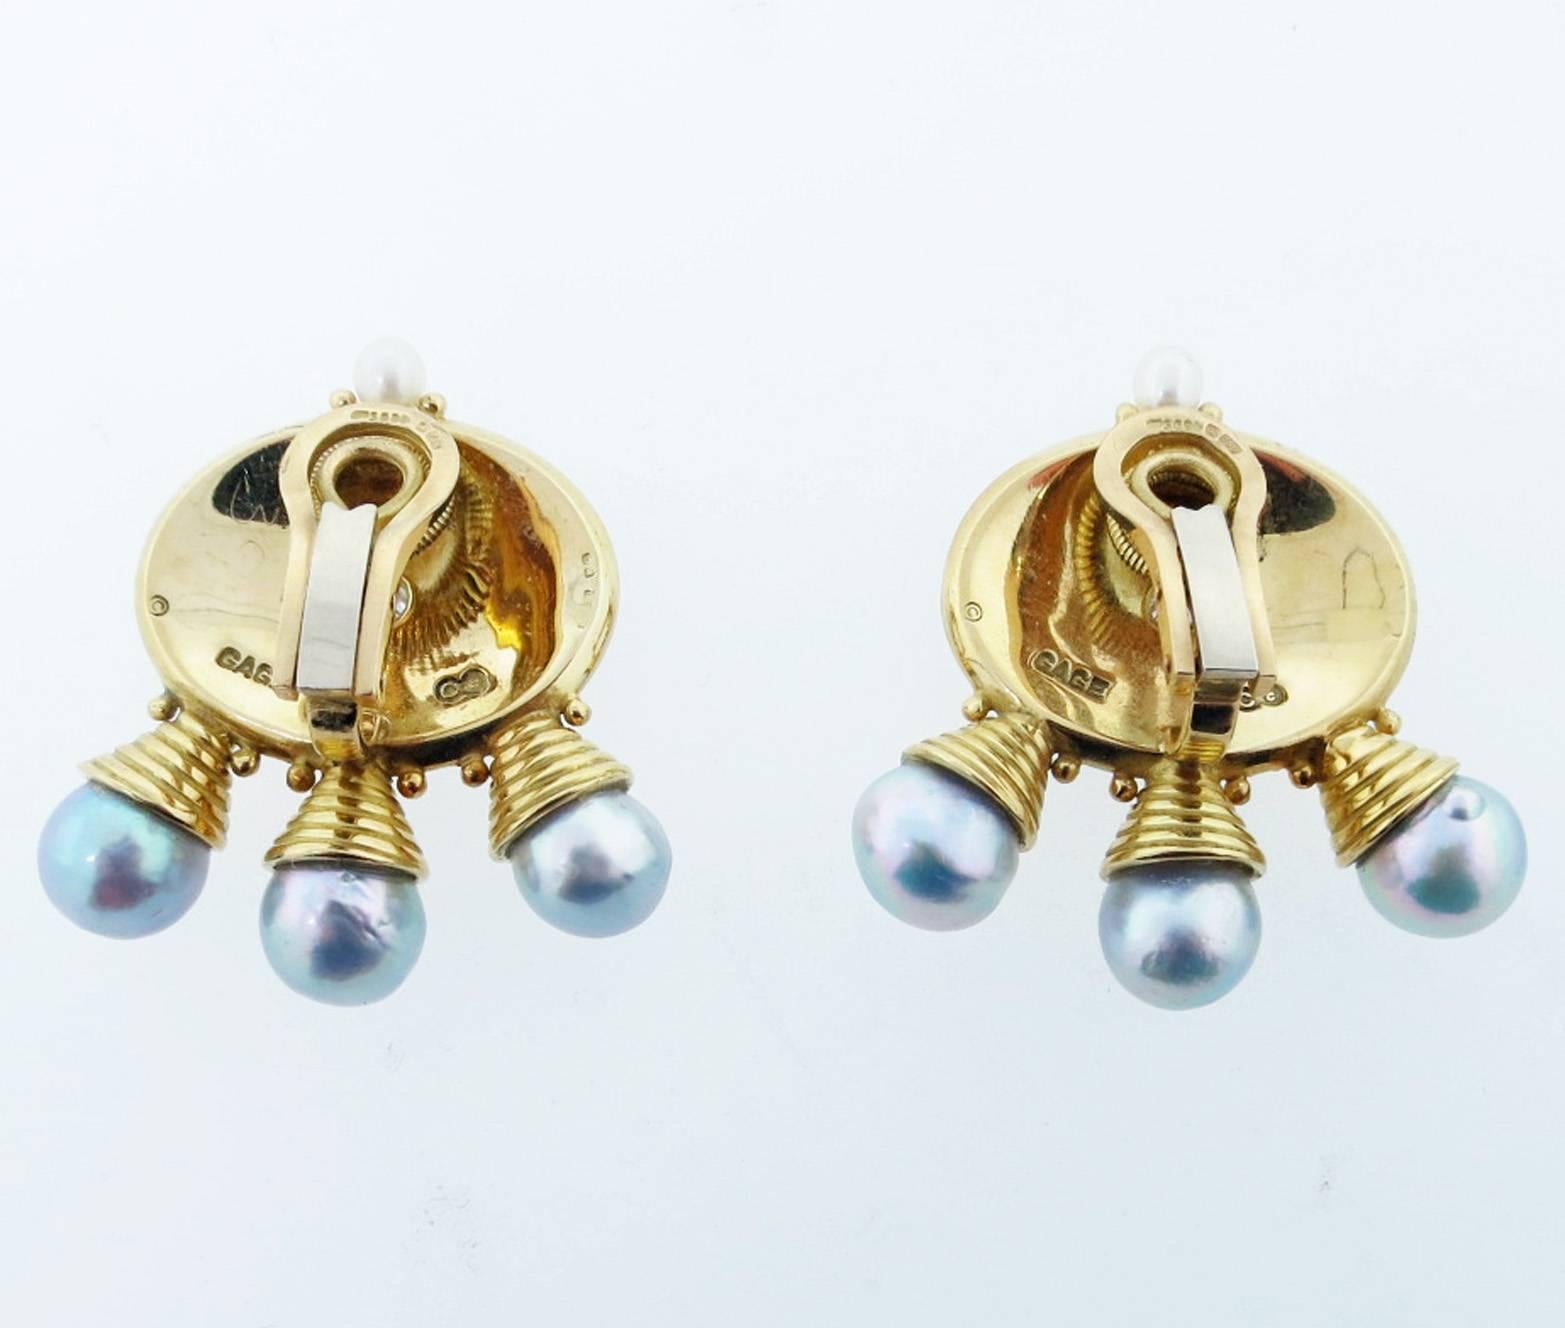 Pair of enamel earrings made by the prestigious  English jeweler Elizabeth Gage. Each 18 kt yellow gold earring is enameled in a rich green and blue enamel with a diamond center and three 8 1/2 mm. pearls. Clip back posts can be added. Signed and